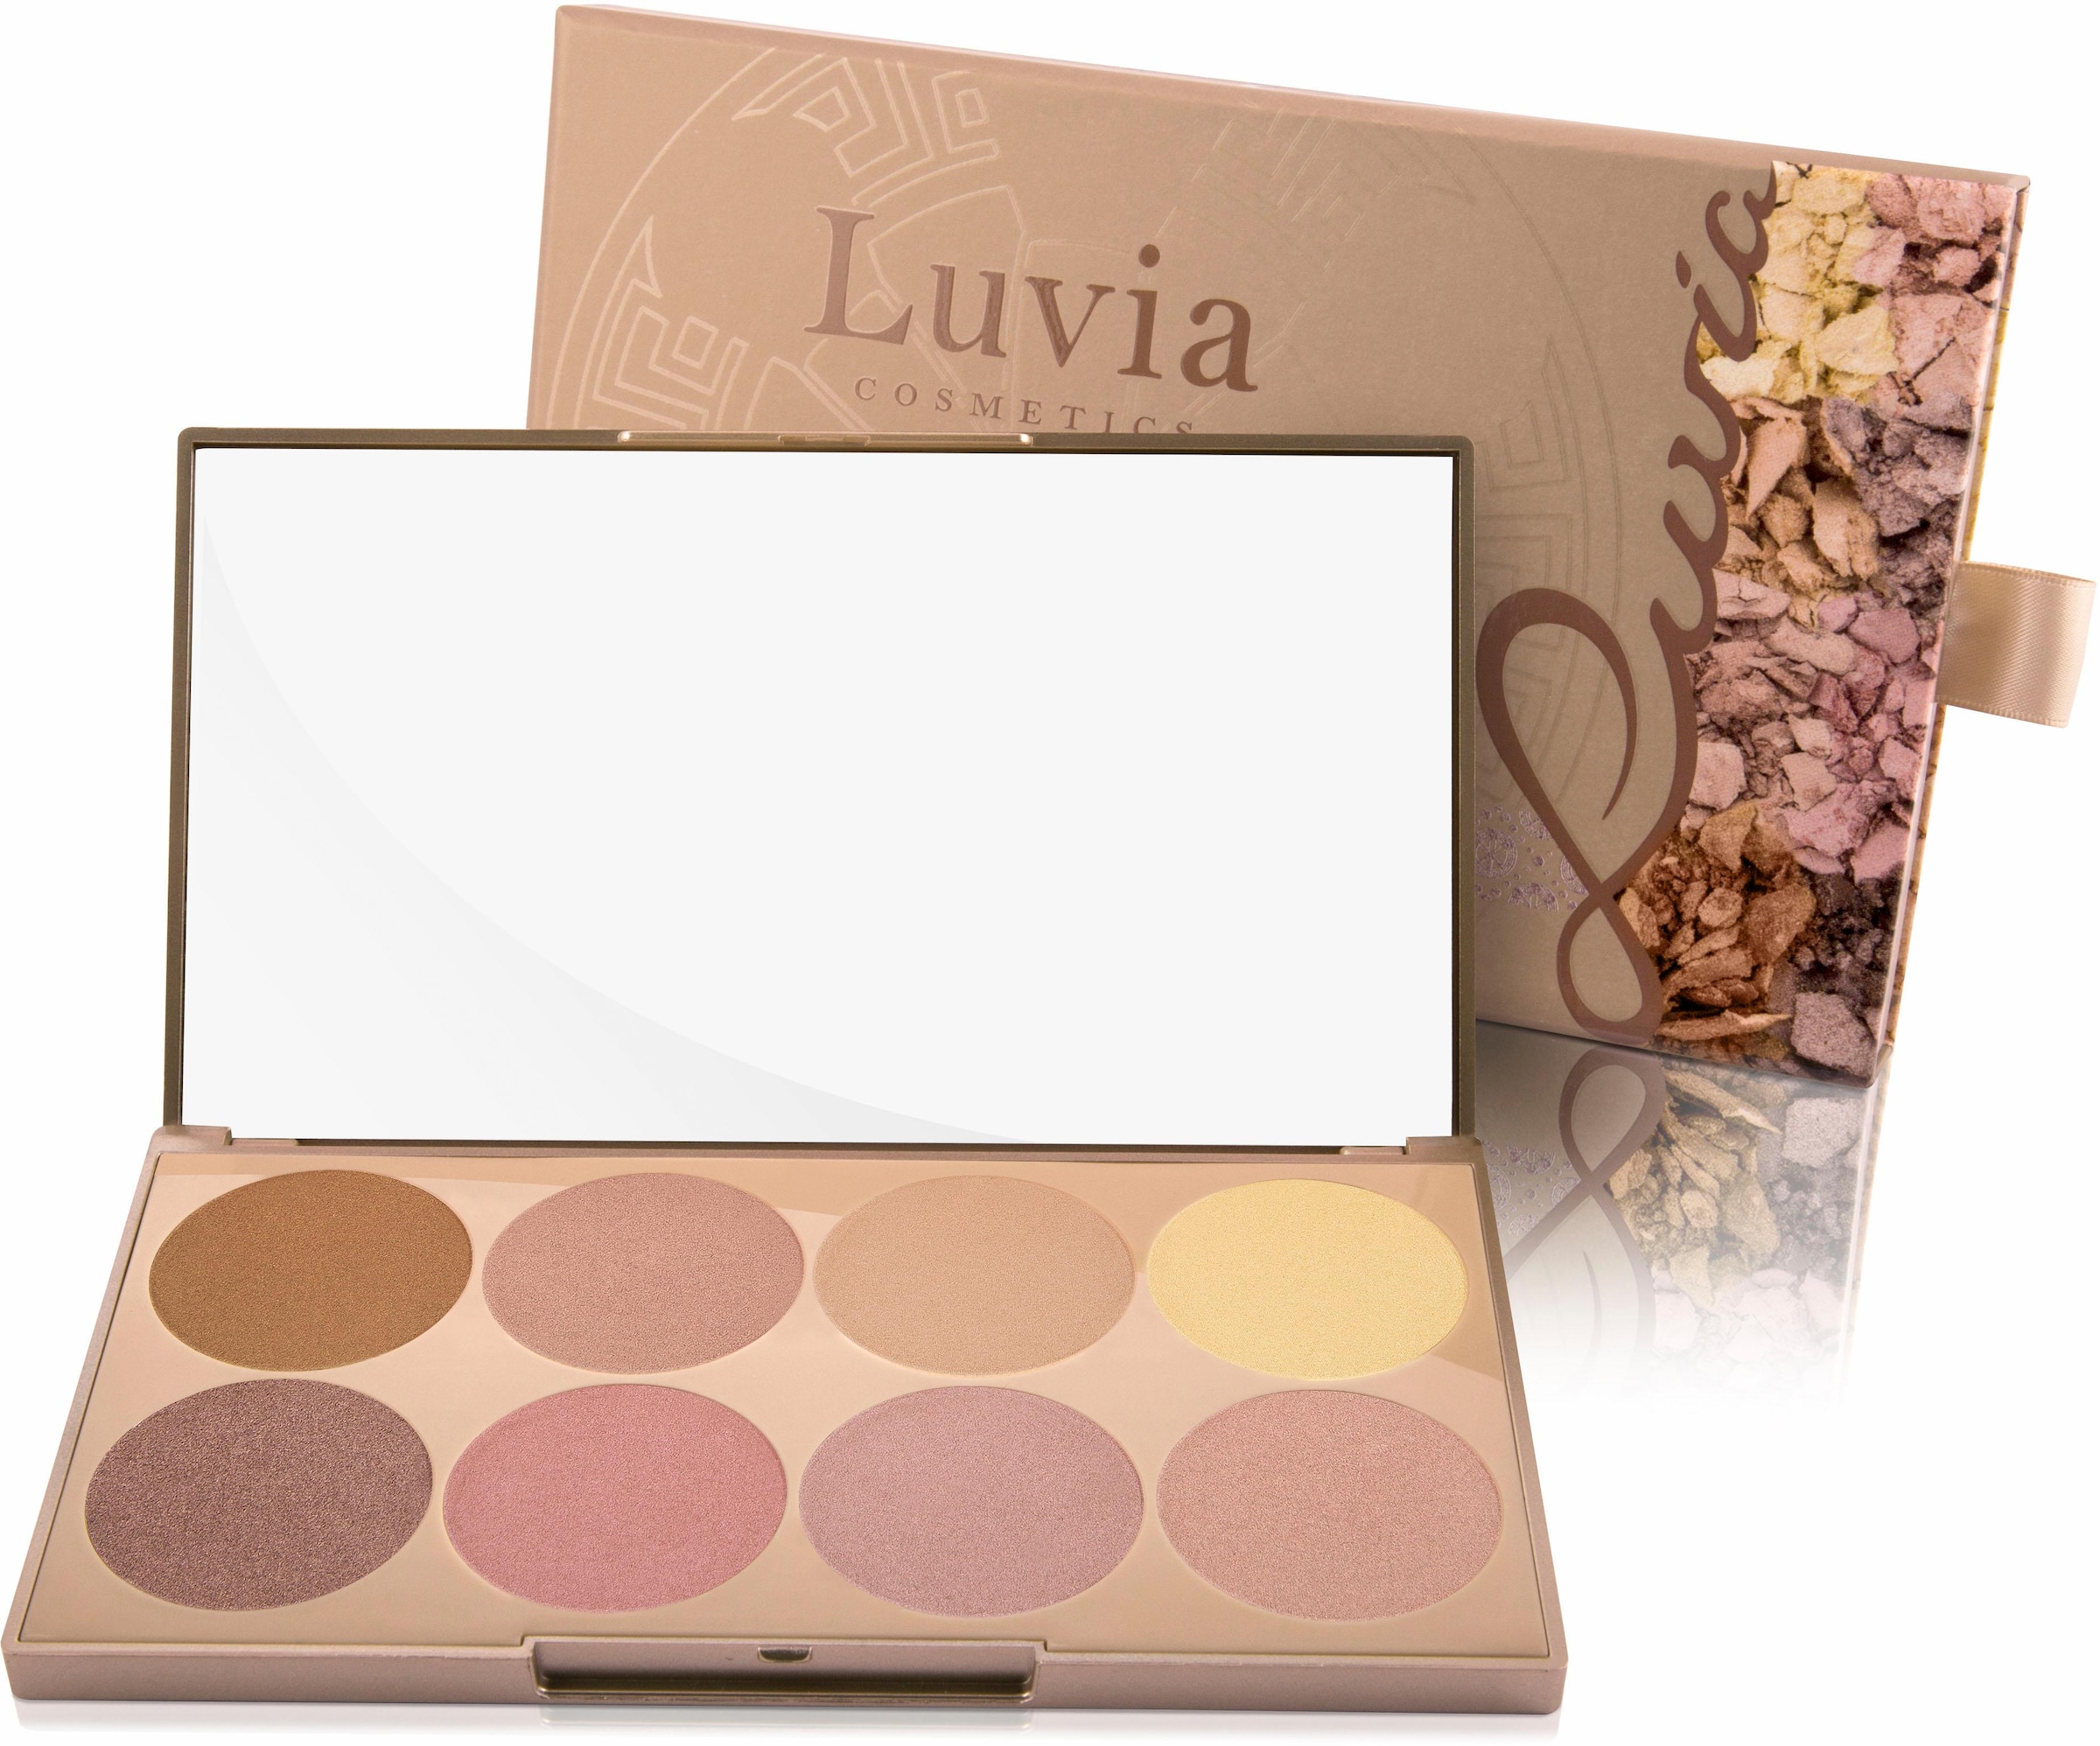 Luvia Cosmetics 8 (8 1« Shades Essential Vol. »Prime Highlighter-Palette Contouring tlg.) Glow Farben